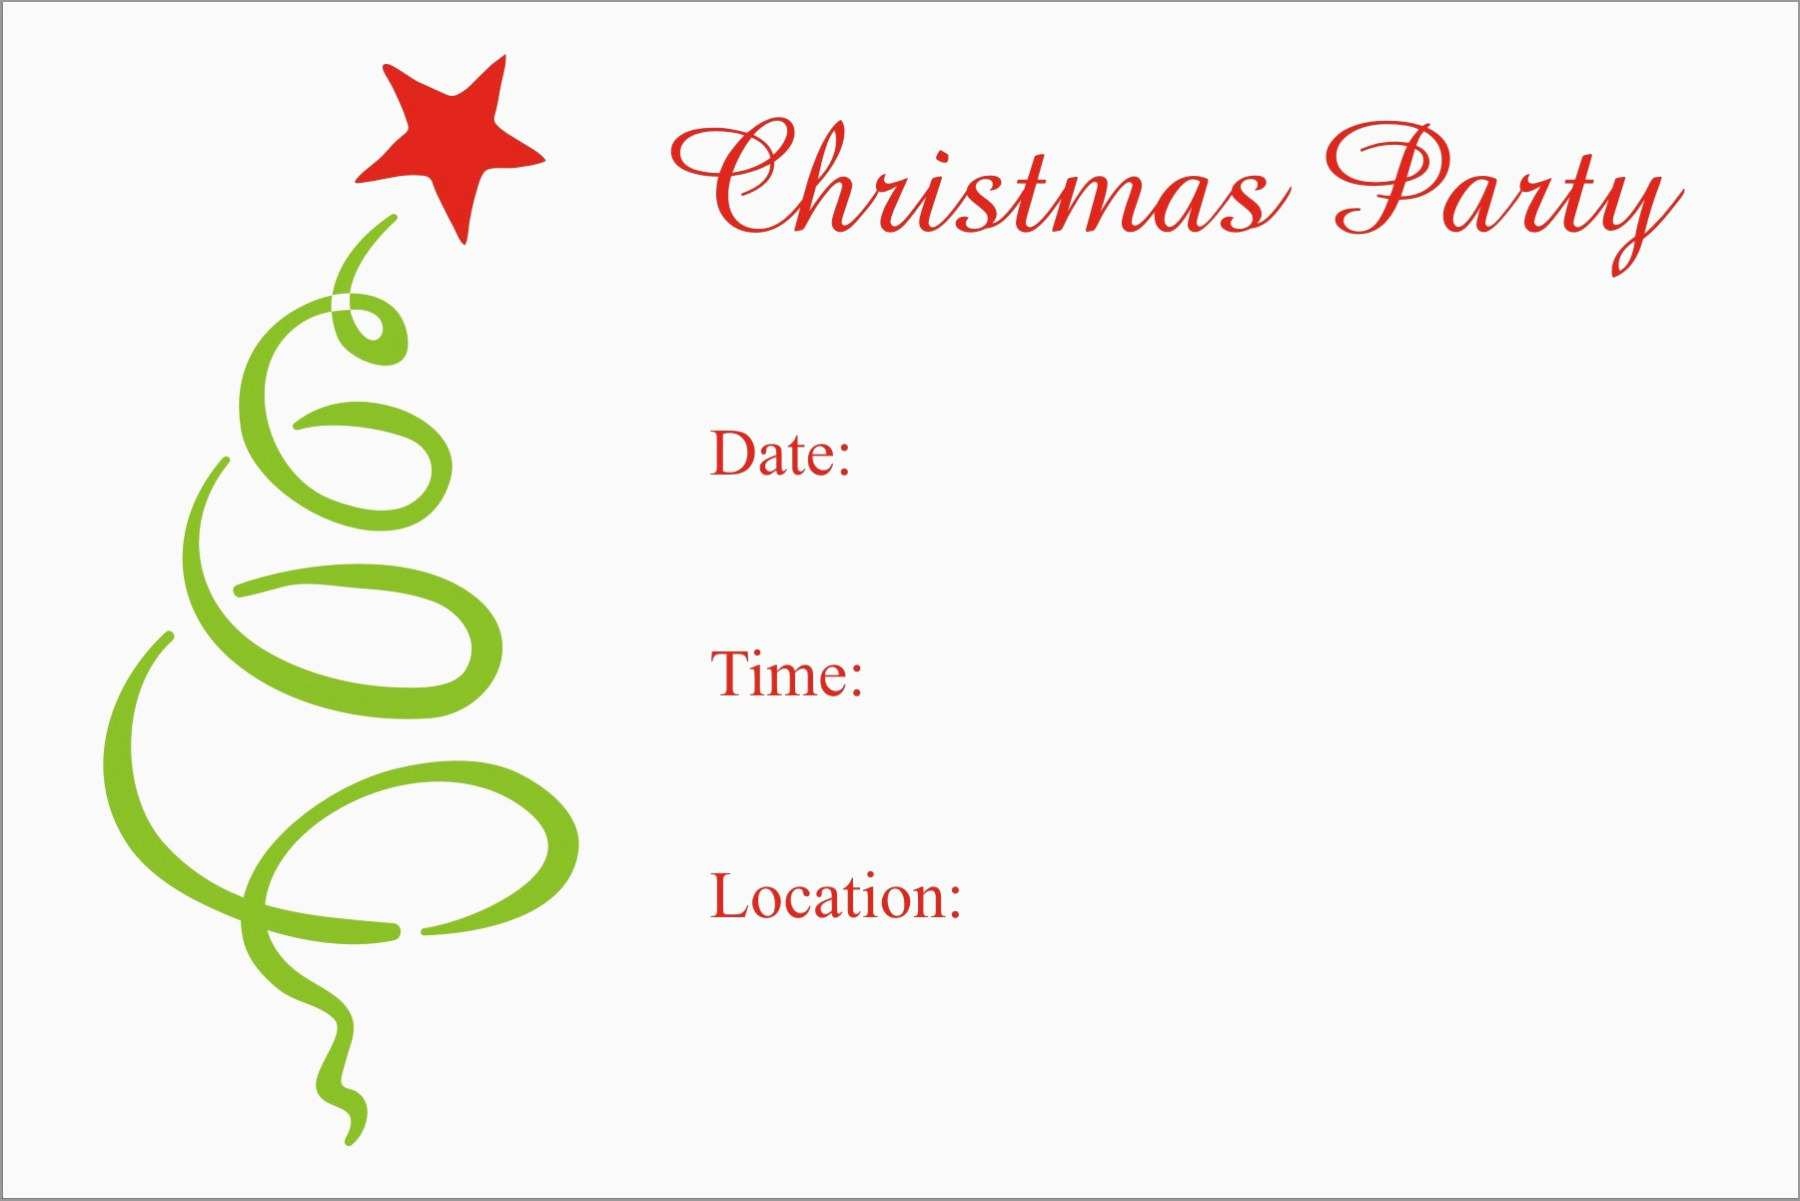 Lovely Christmas Party Invitation Templates Free Printable | Best Of - Christmas Party Invitation Templates Free Printable